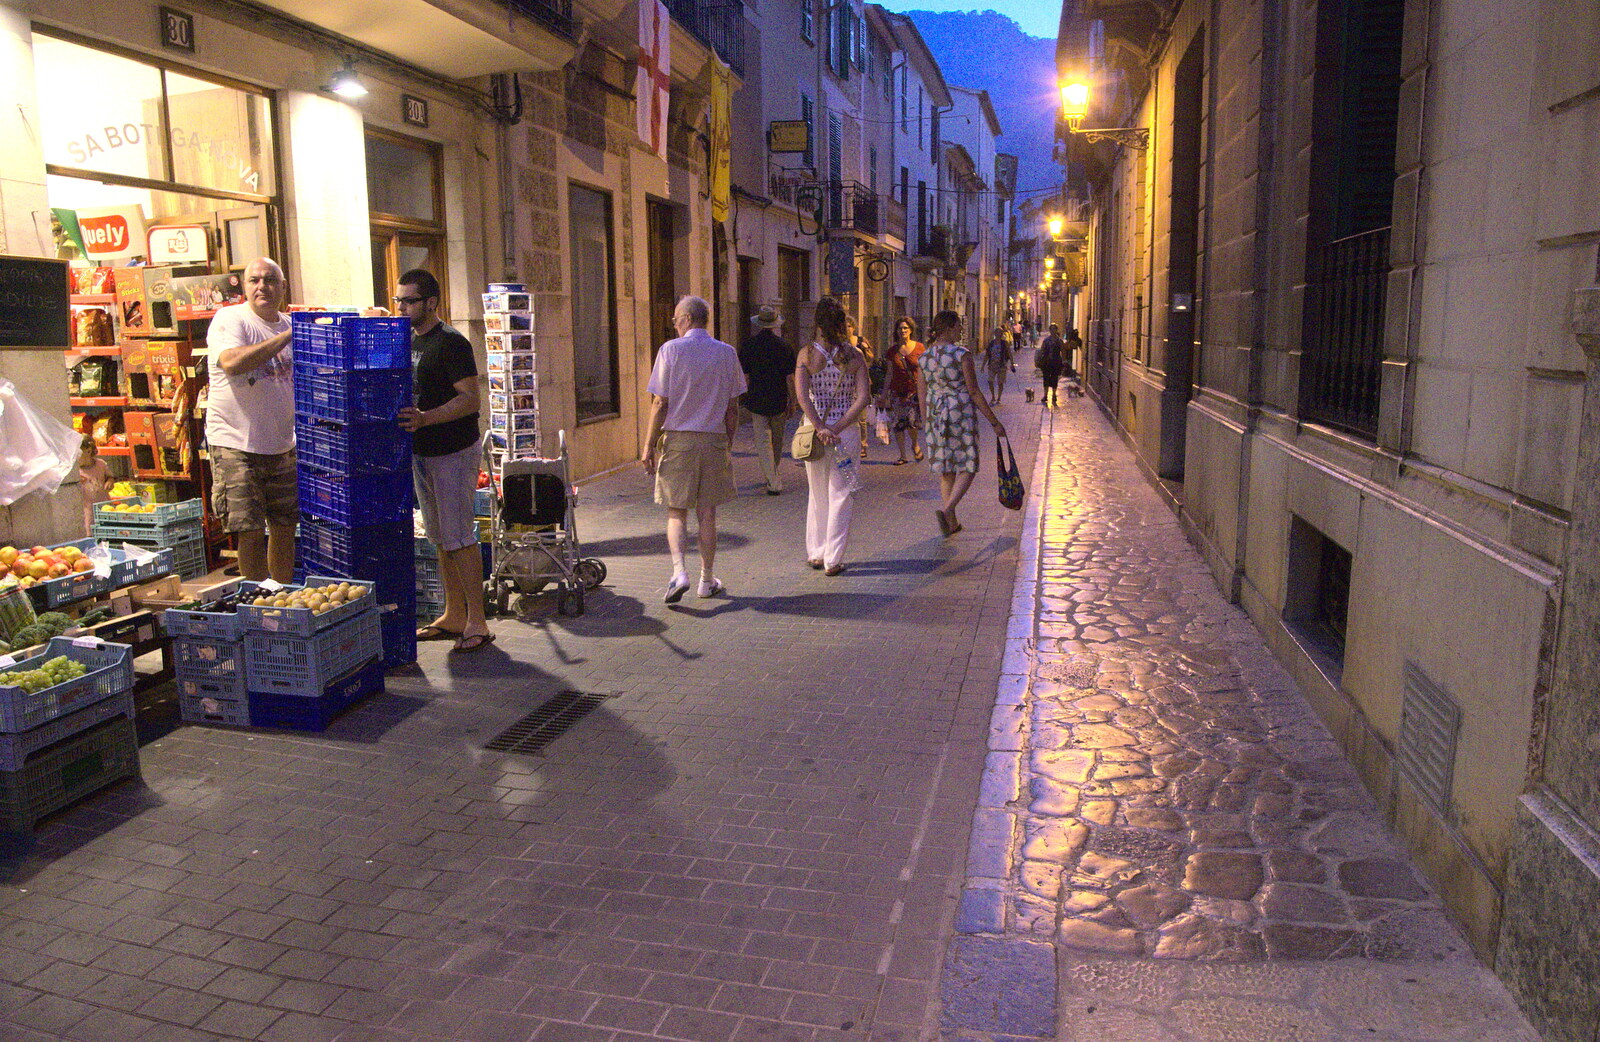 Wandering through town in the dusk from A Trip to Sóller, Mallorca, Spain - 8th-14th September 2012